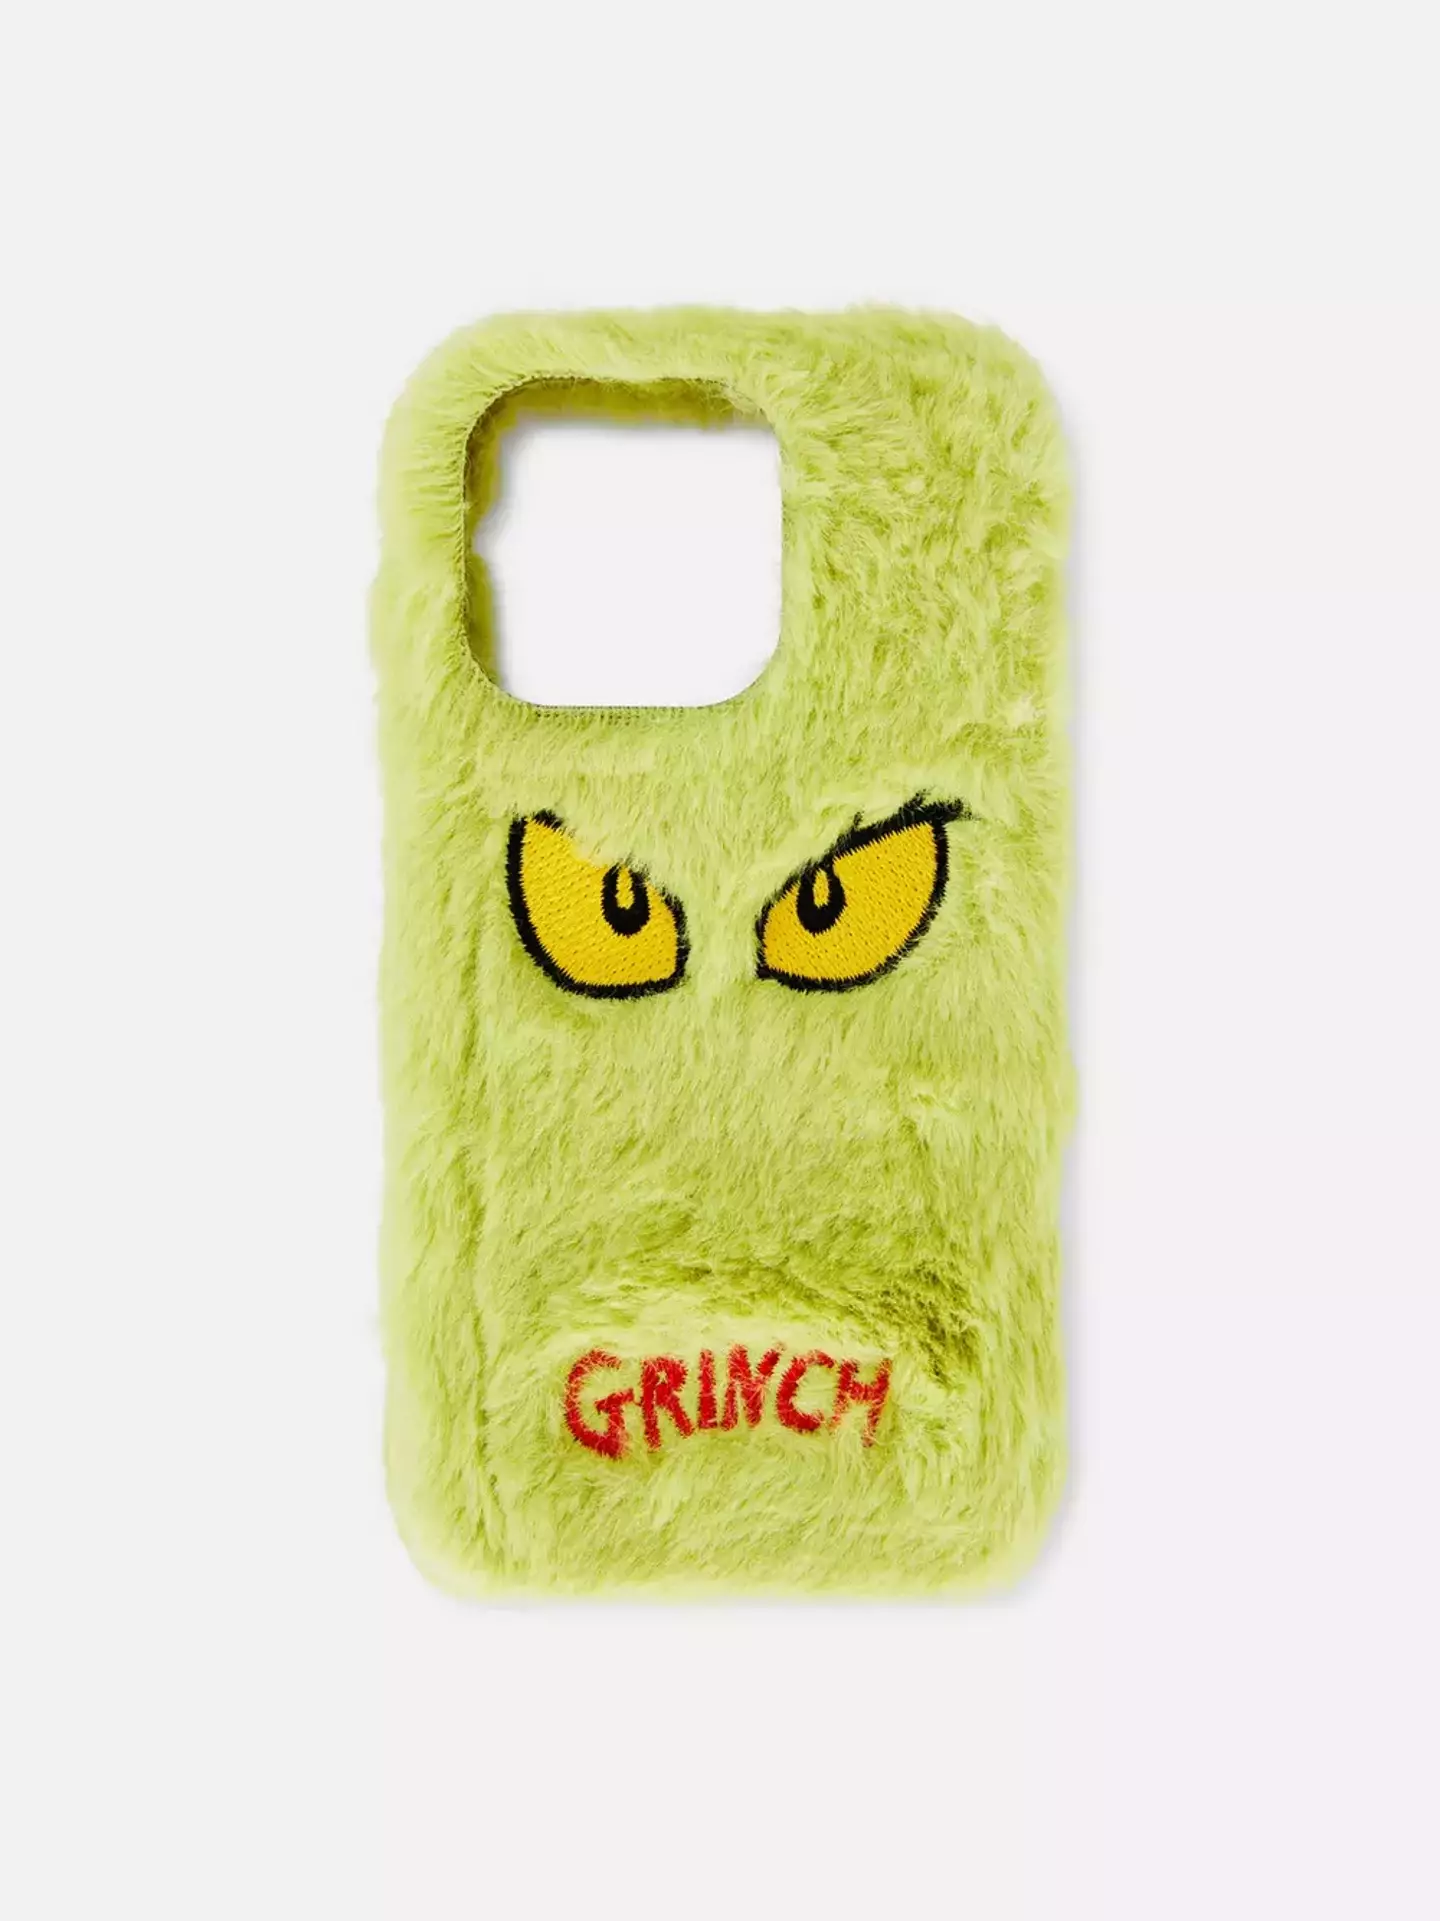 Check out Primark's wild Grinch furry phone case.